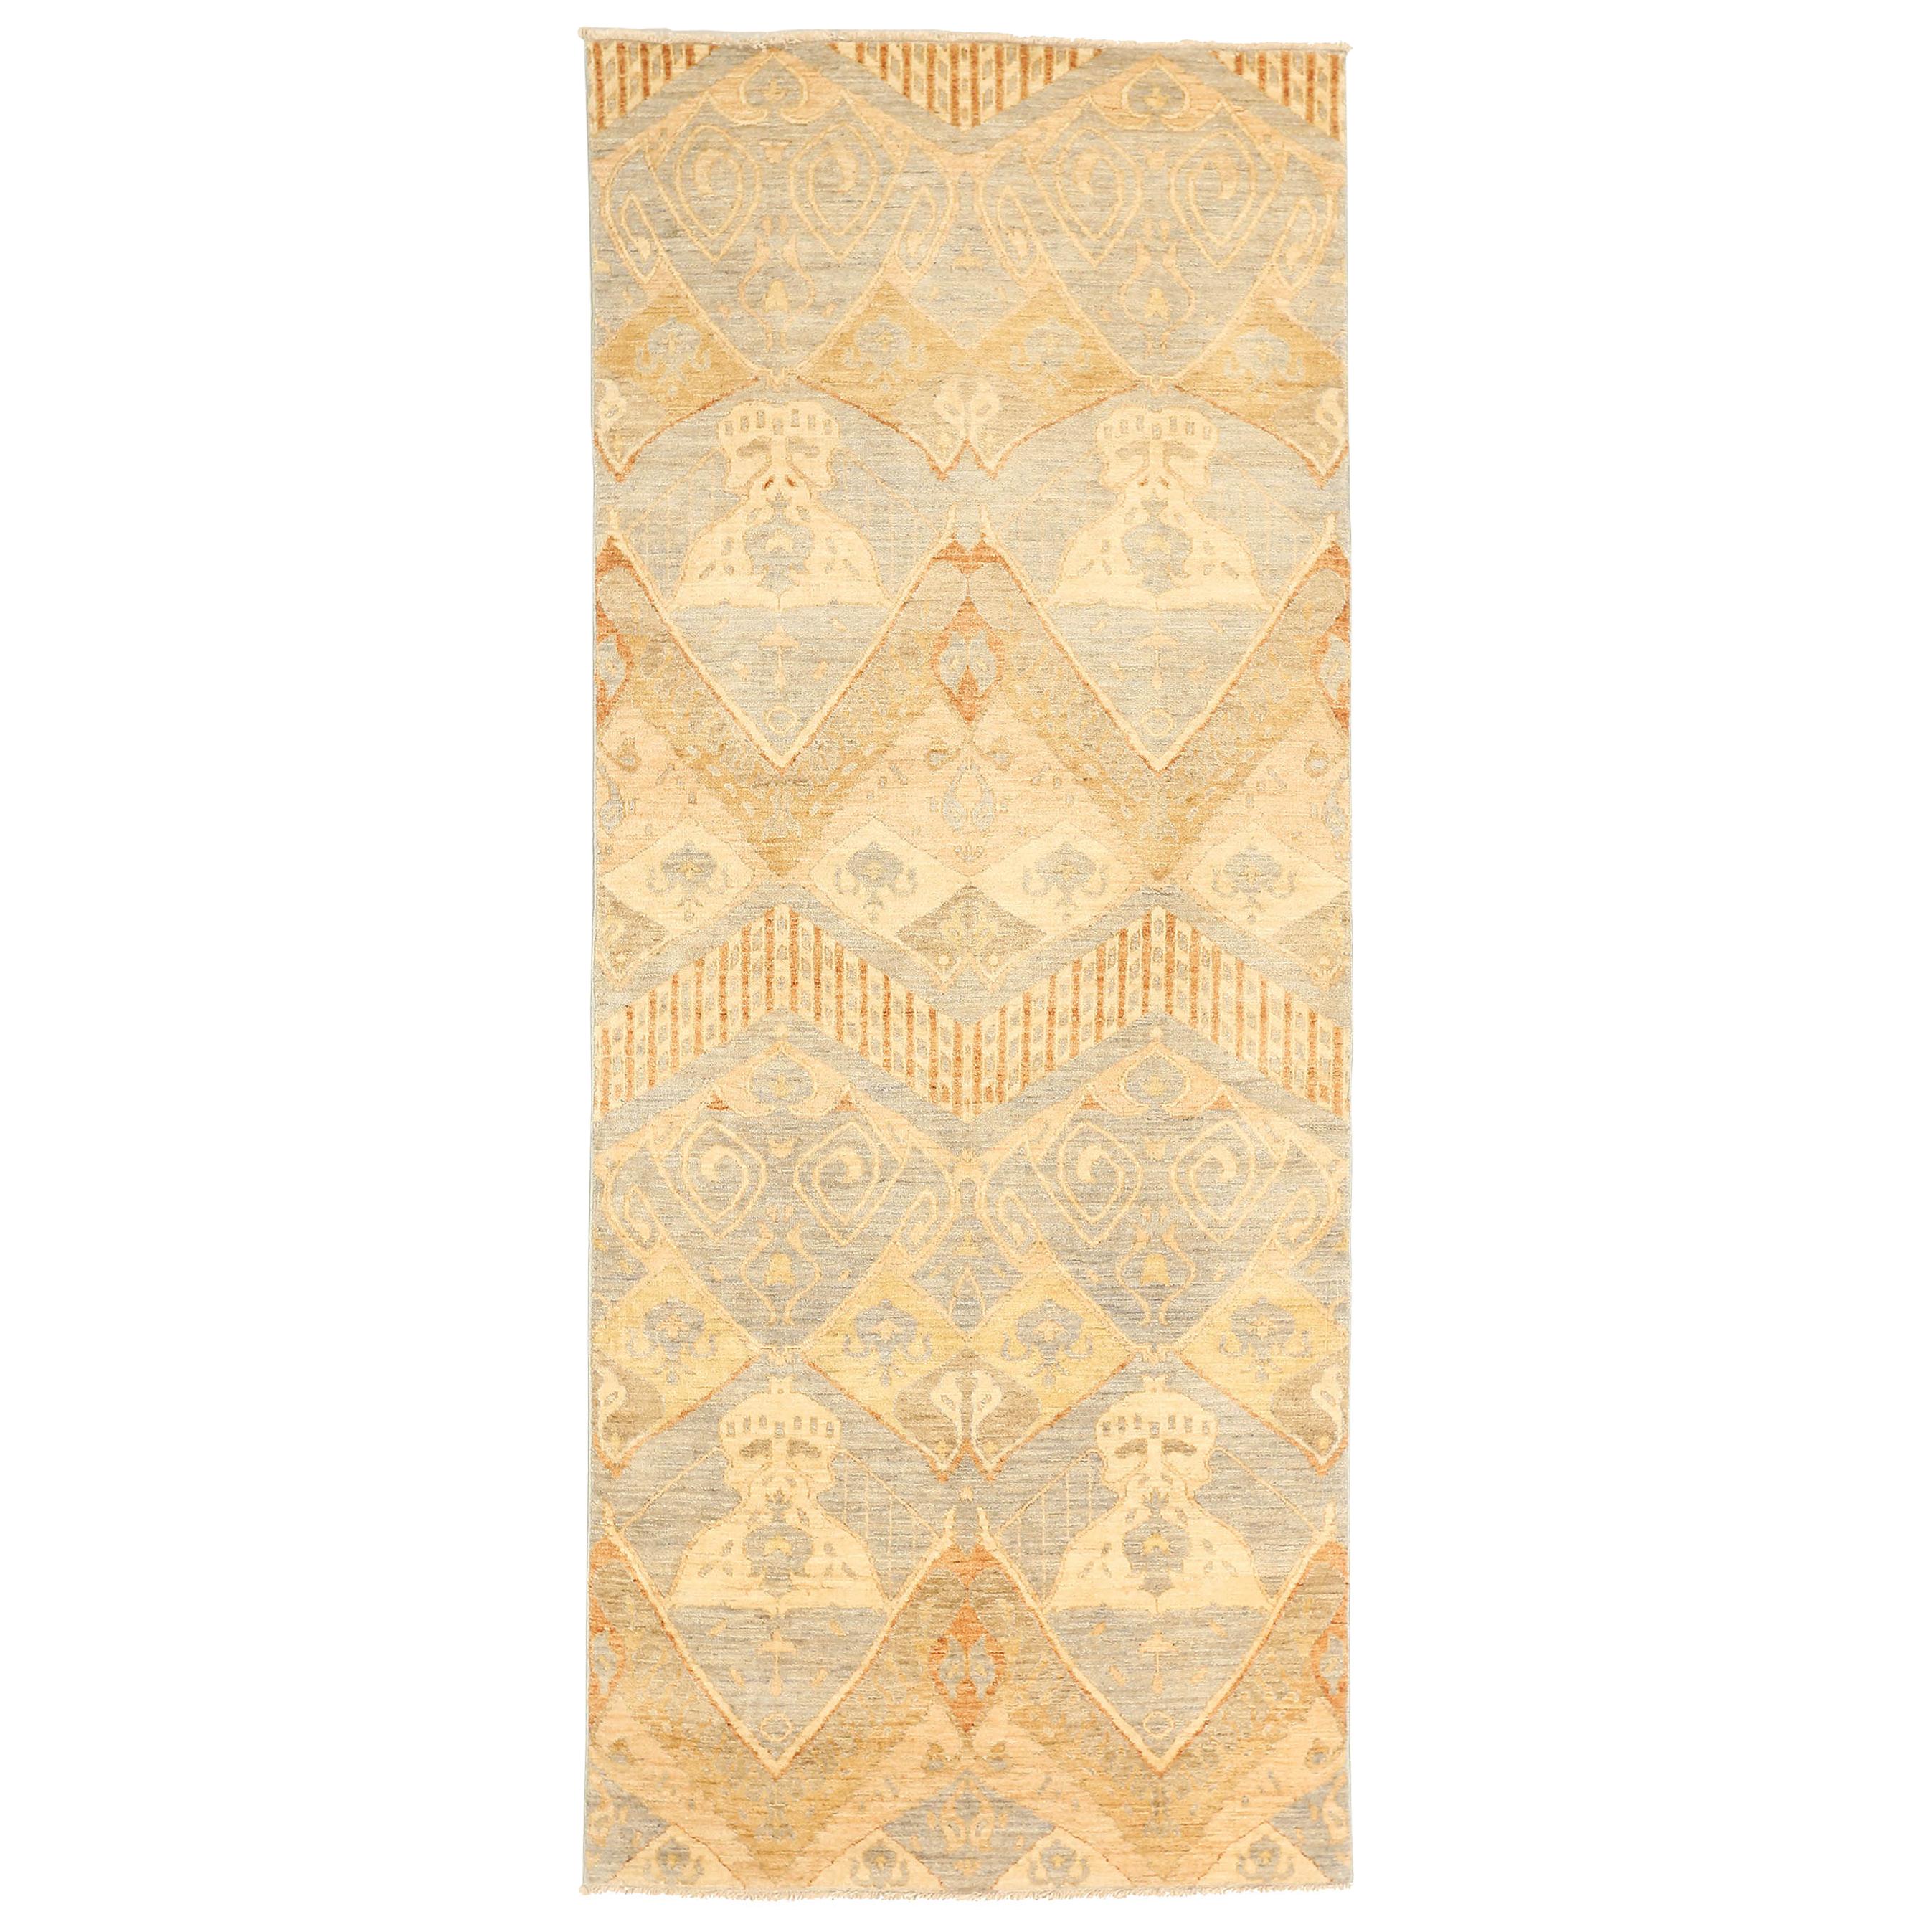 Contemporary Afghan Ikat Rug with Brown & Ivory Botanical Details For Sale